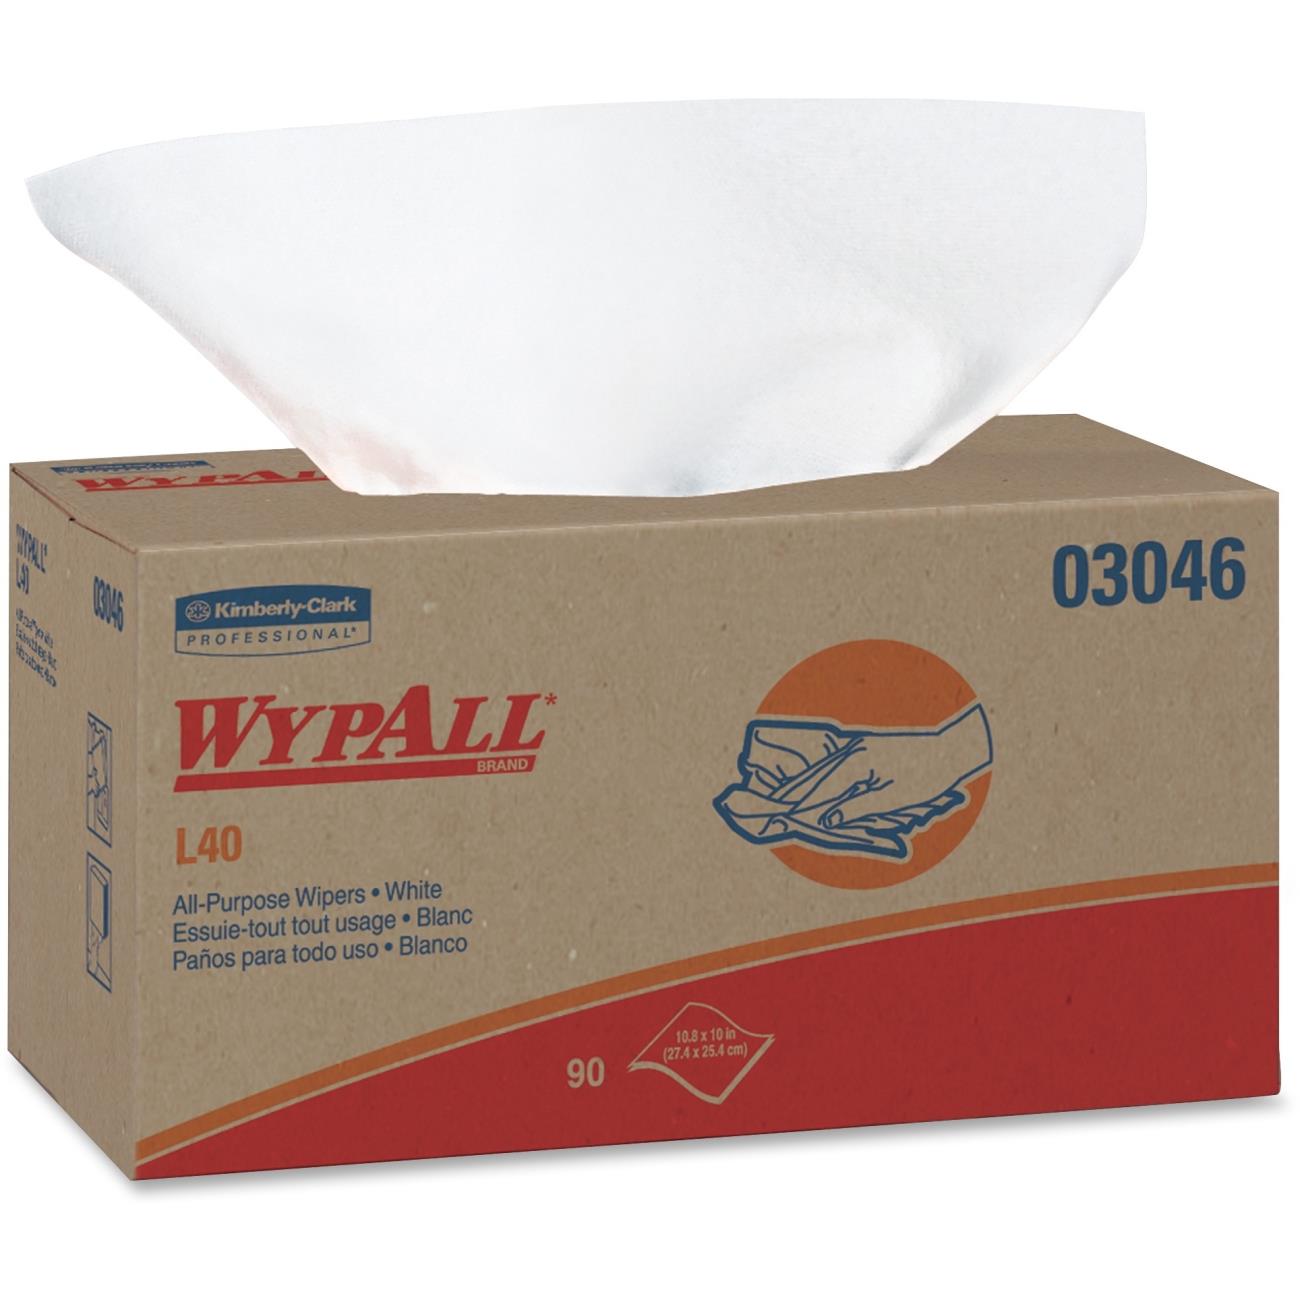 WYPALL L40 POP-UP BOX WHITE 90 WIPERS - Cleaning & Janitorial